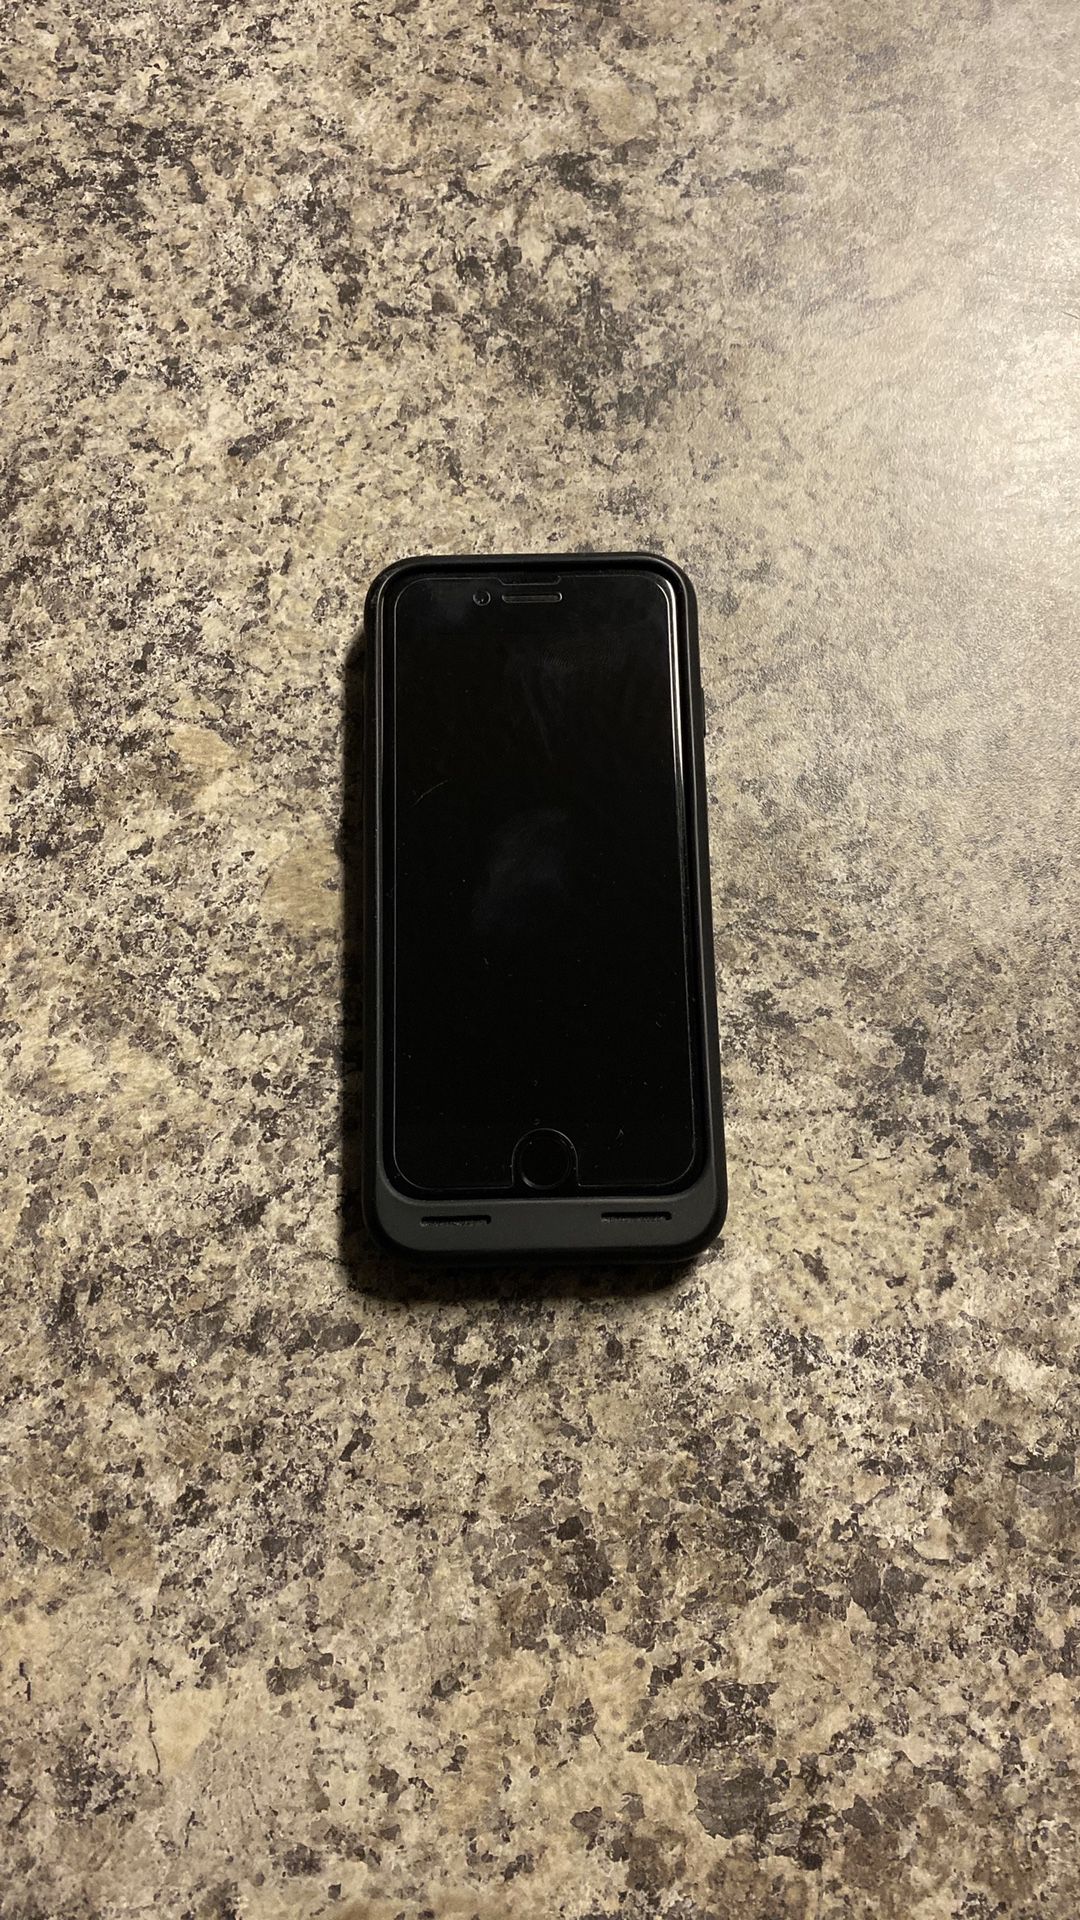 iPhone 7 with smart battery case